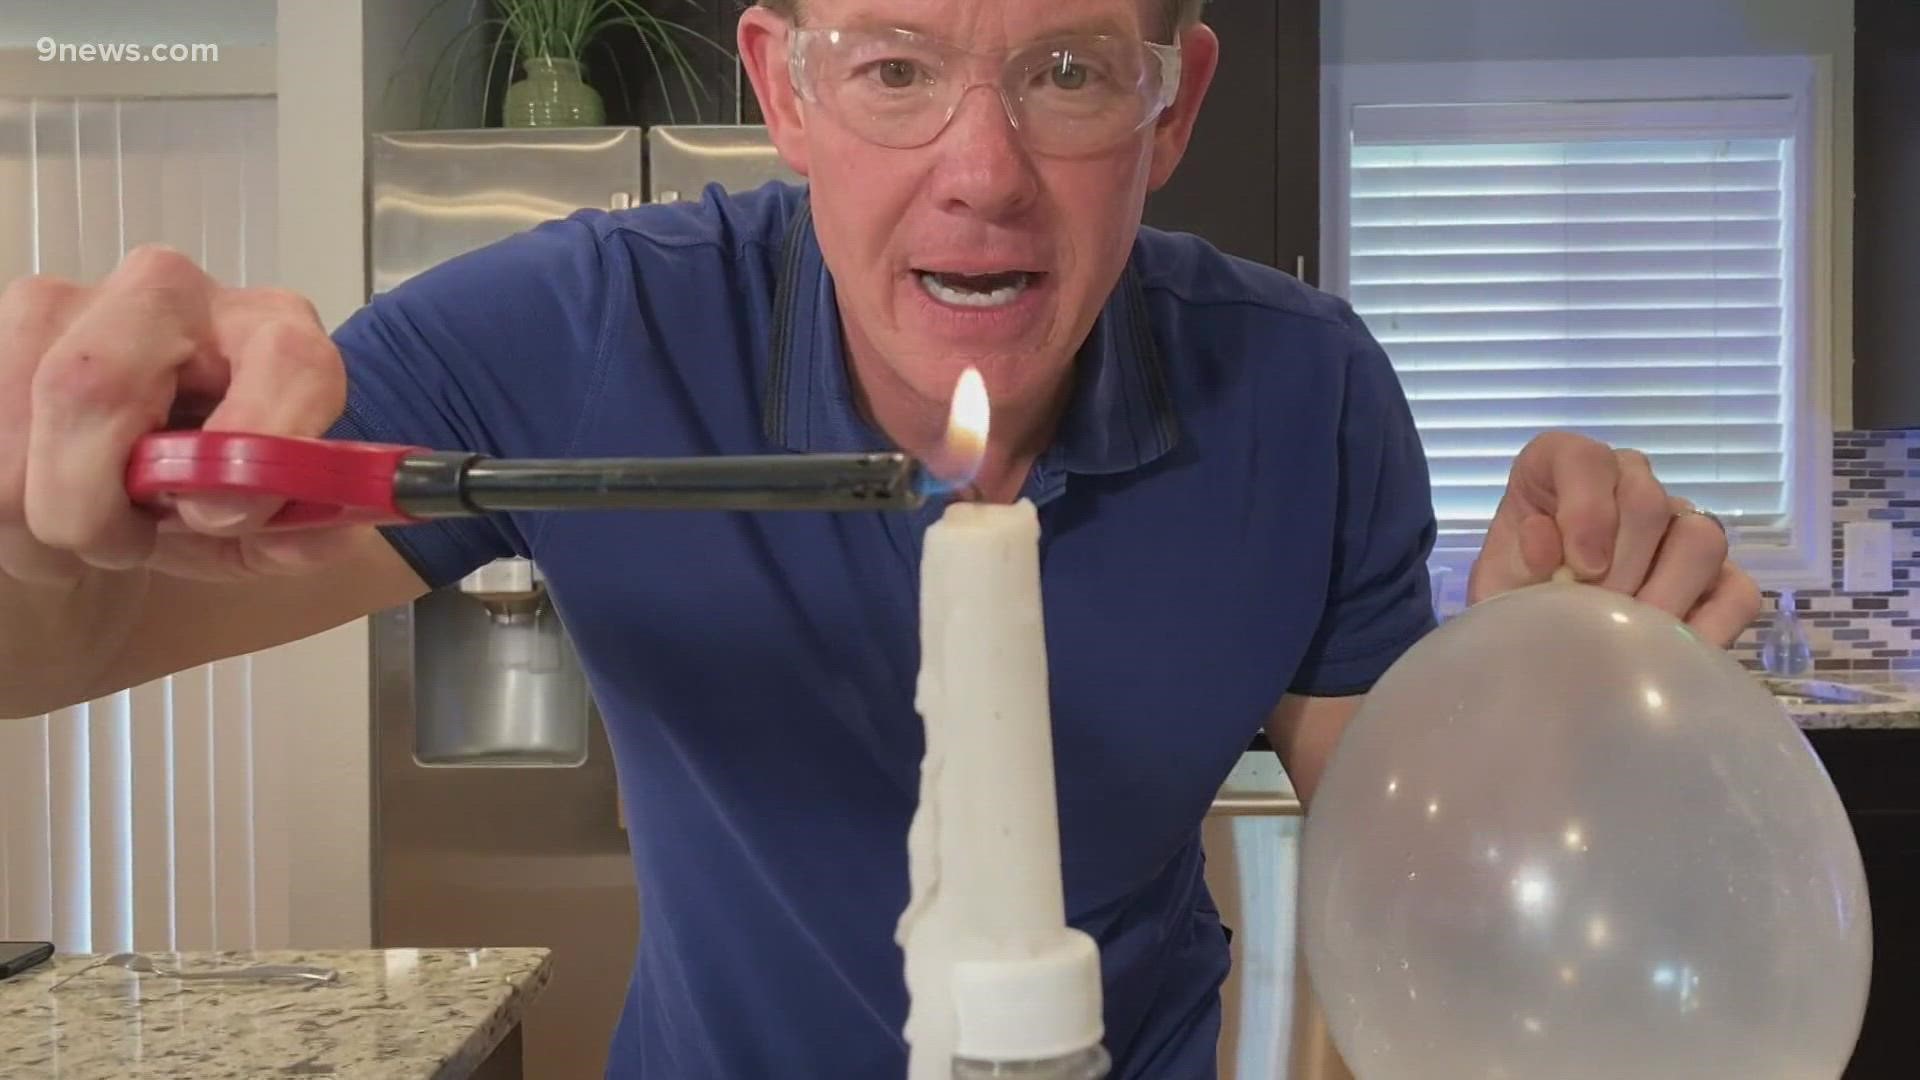 Balloons and candles are great for birthdays - but they don't mix - unless you're our science guy Steve Spangler.